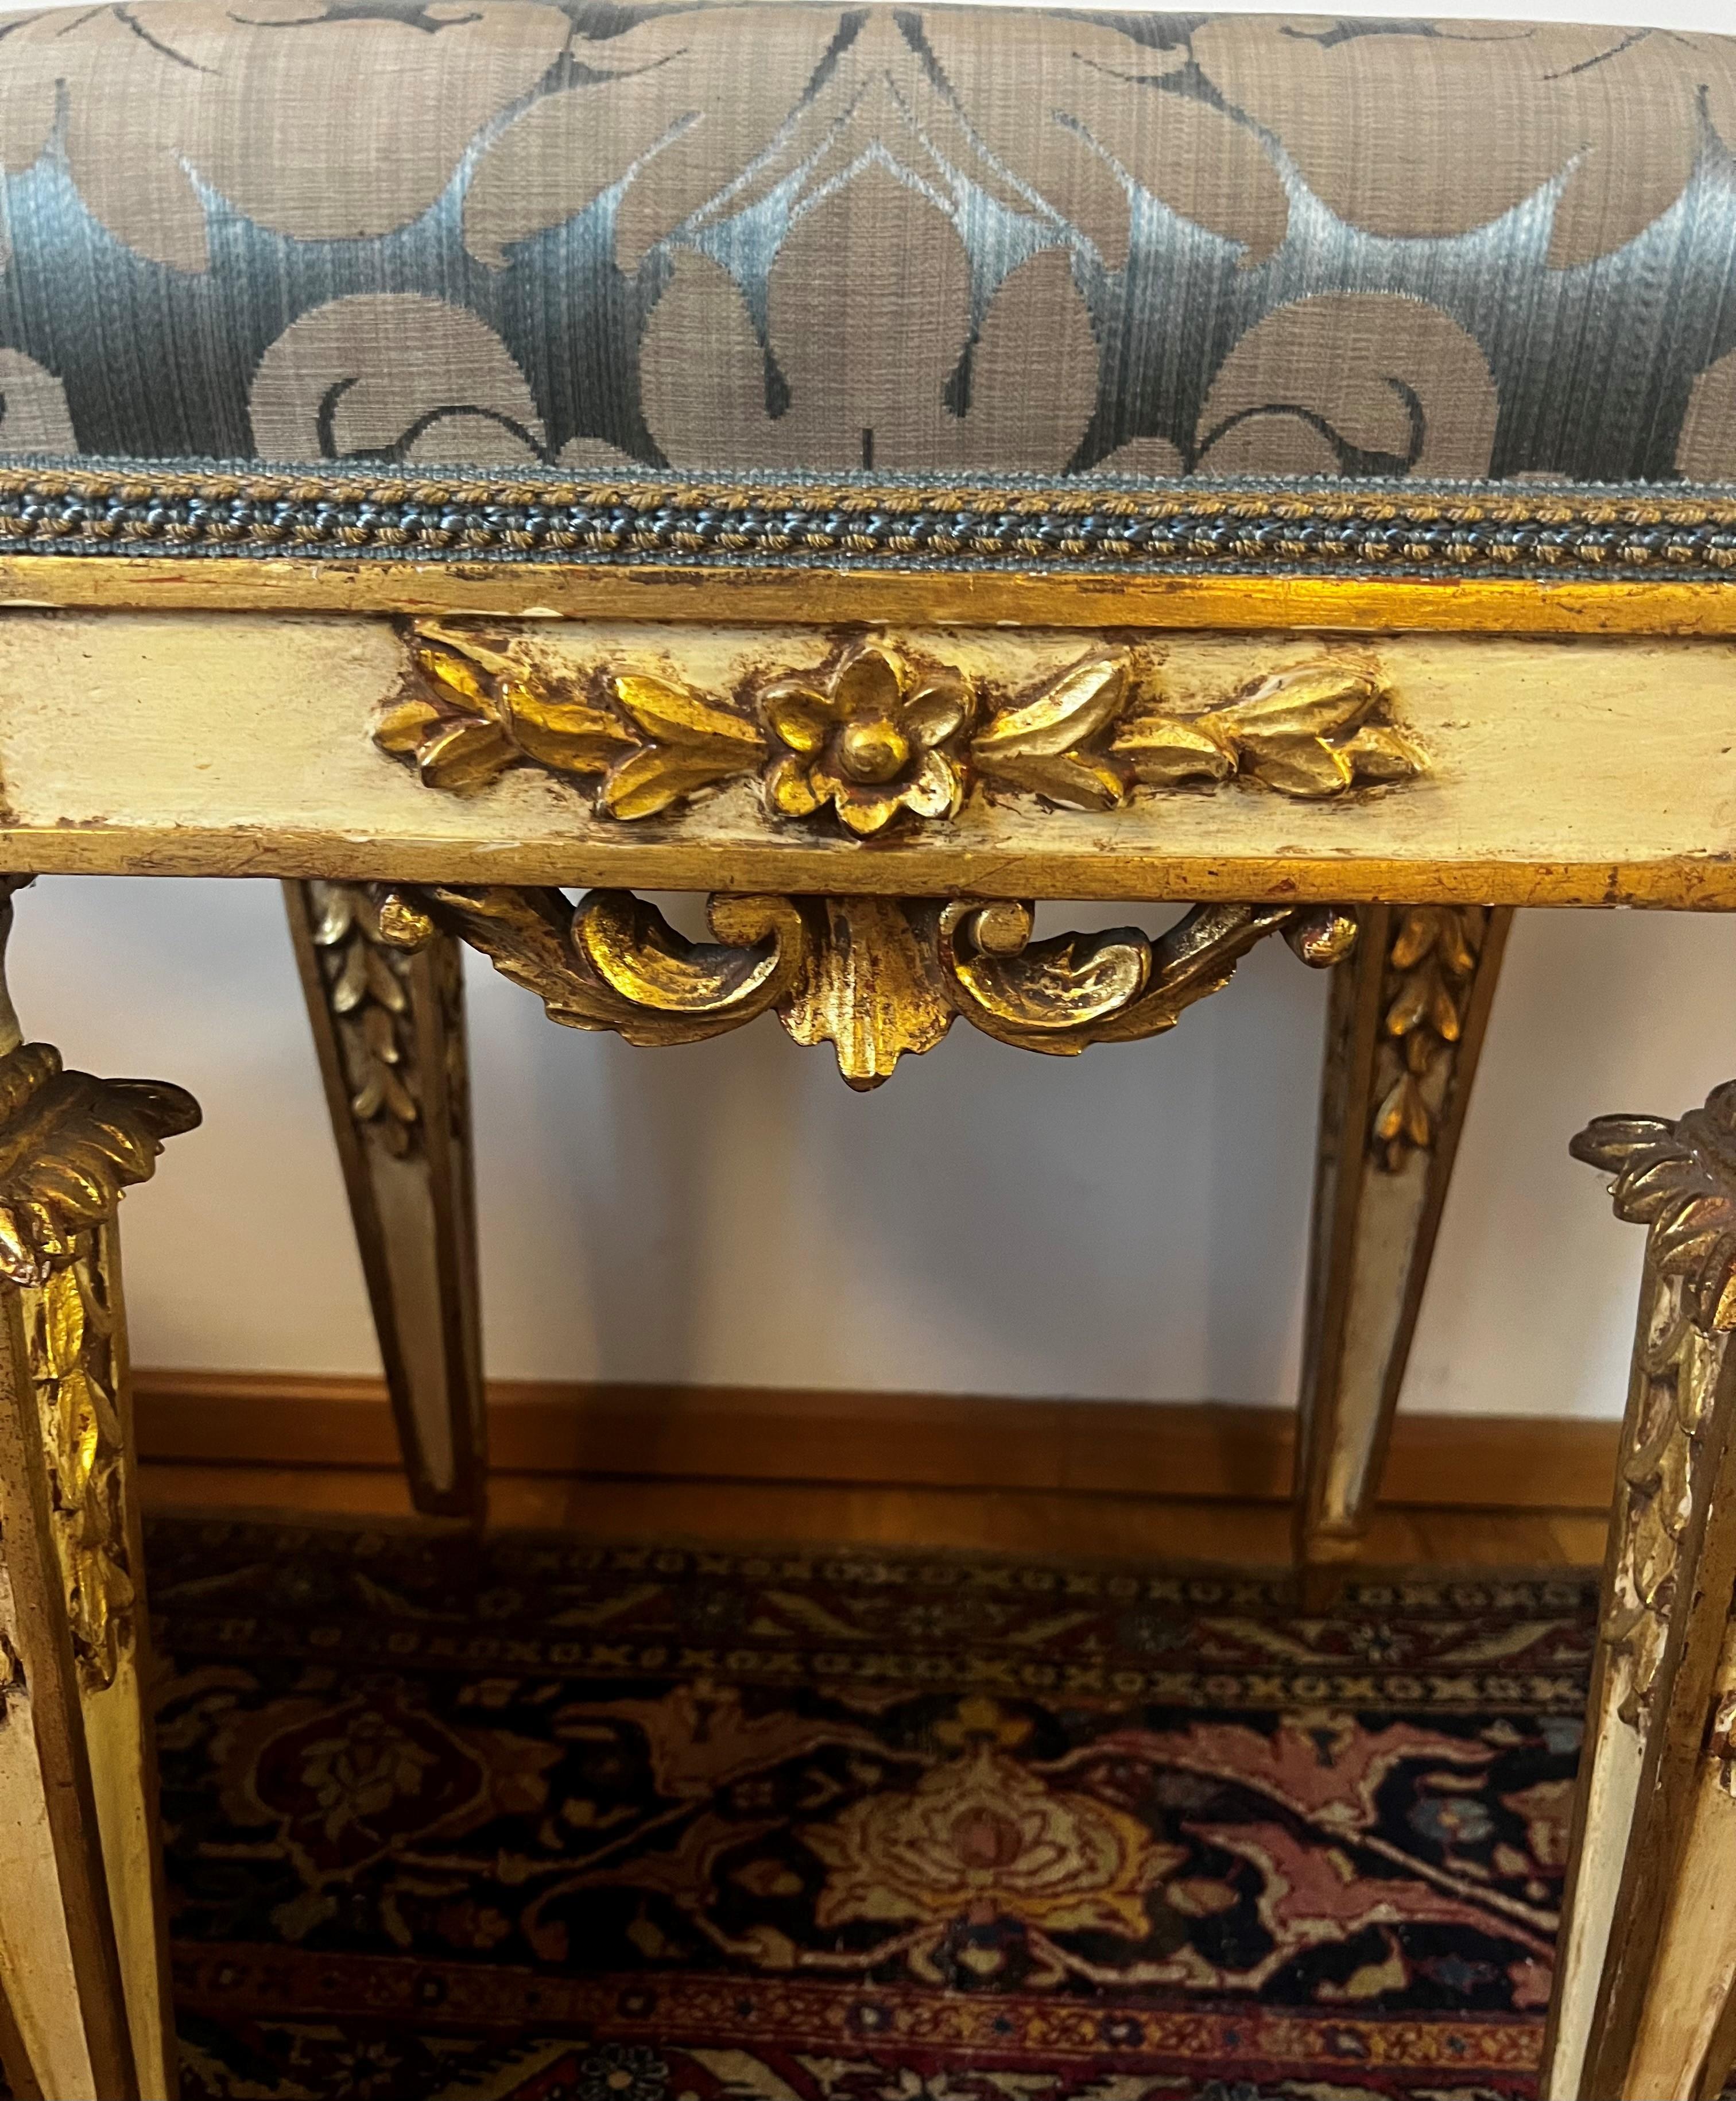 This elegant and decorative 18th century Louis XVI Stool or Tabouret has an original chalk-white painted surface, beautiful gilt details and wonderful old patina. This is an extraordinary piece of furniture, carved with style and upholstered with